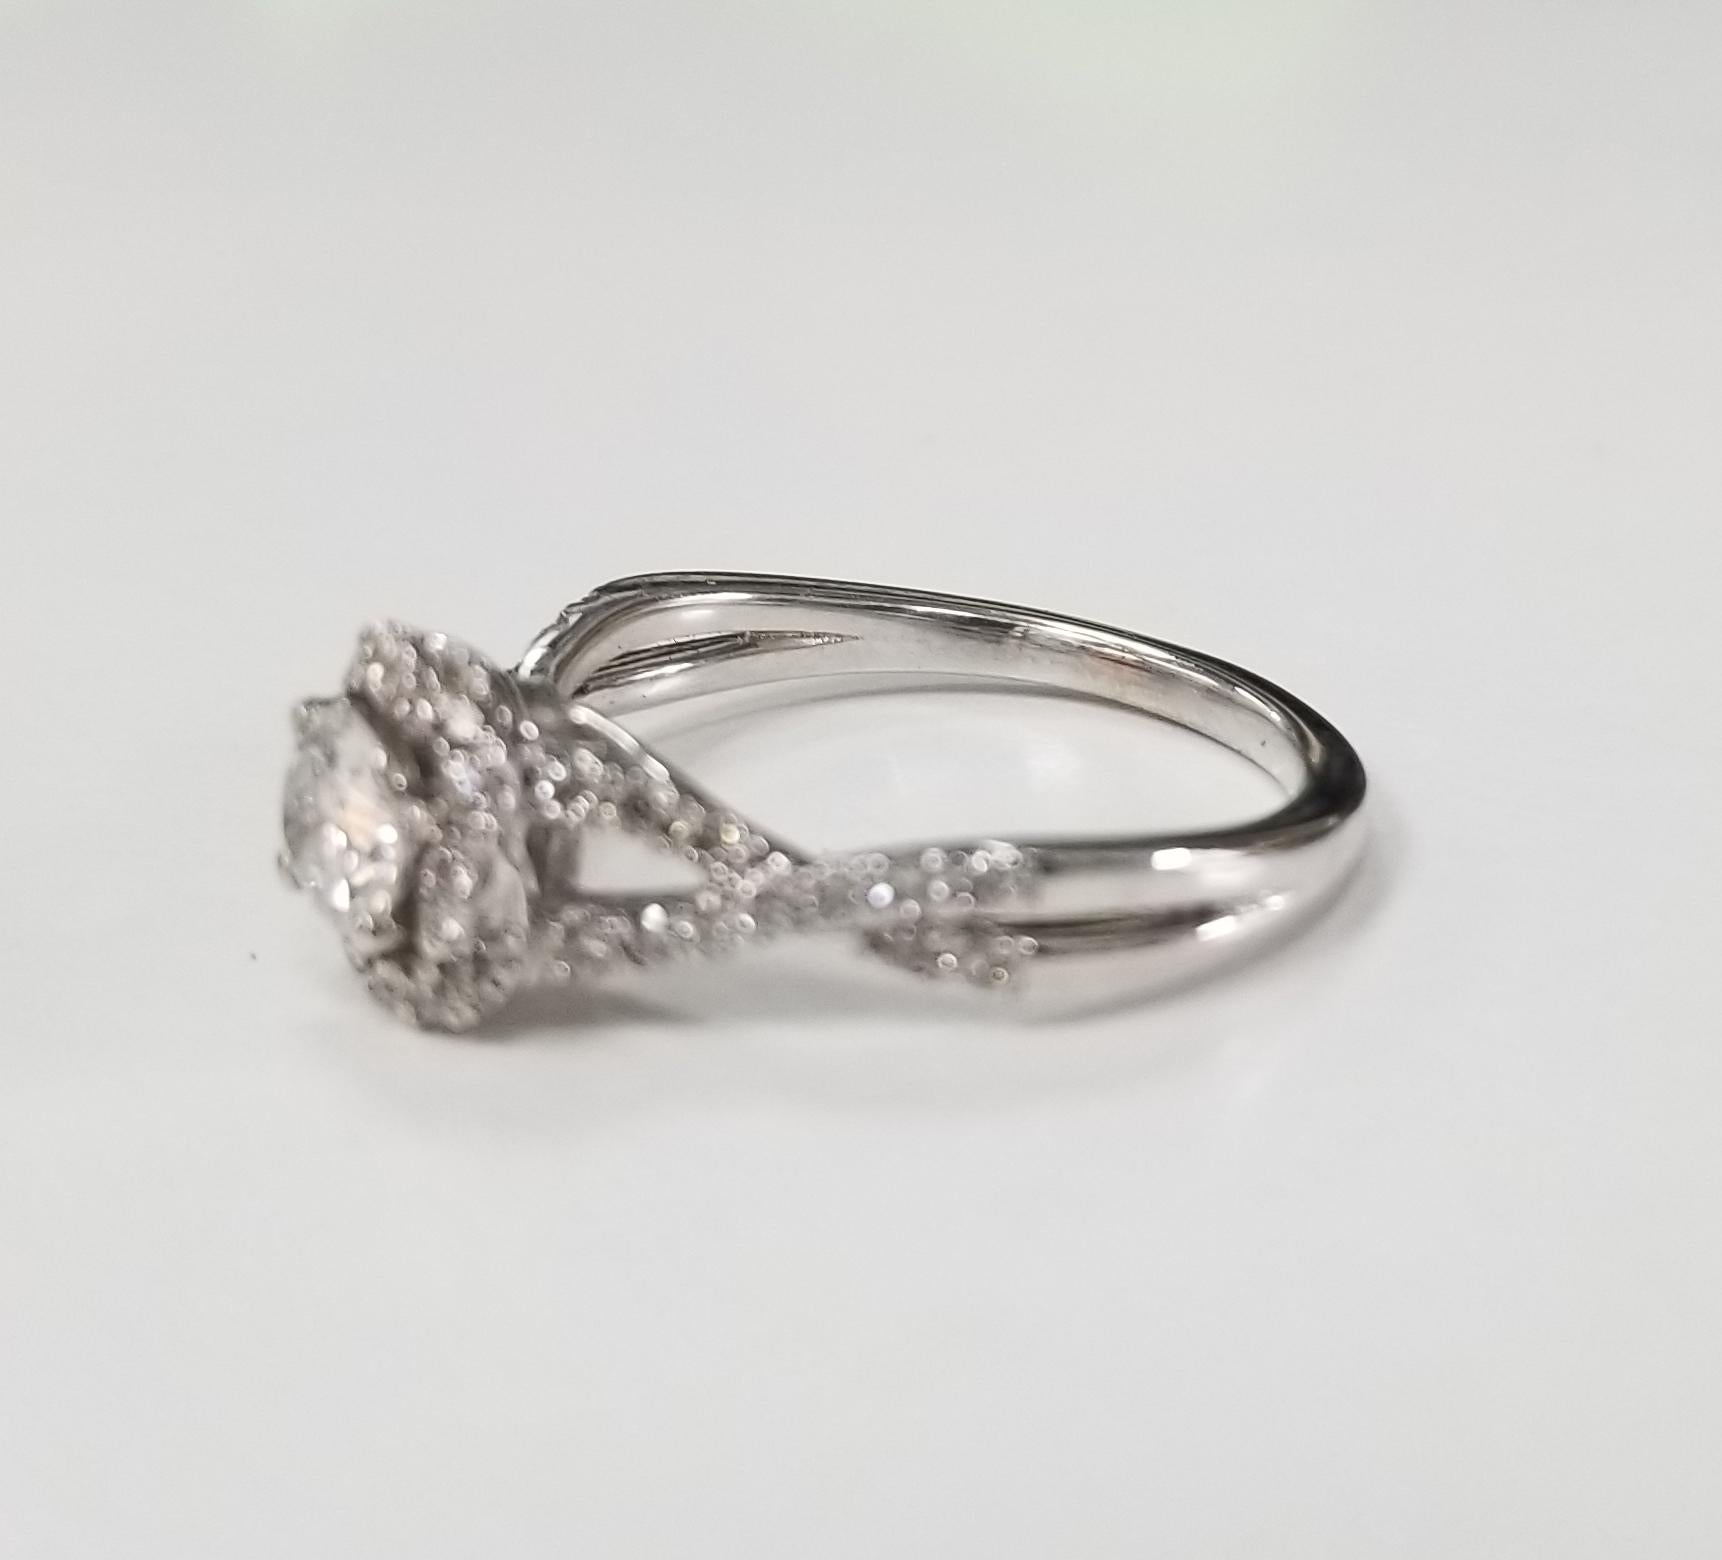 14k white gold bypass diamond ring, containing 1 brilliant cut diamond; color 